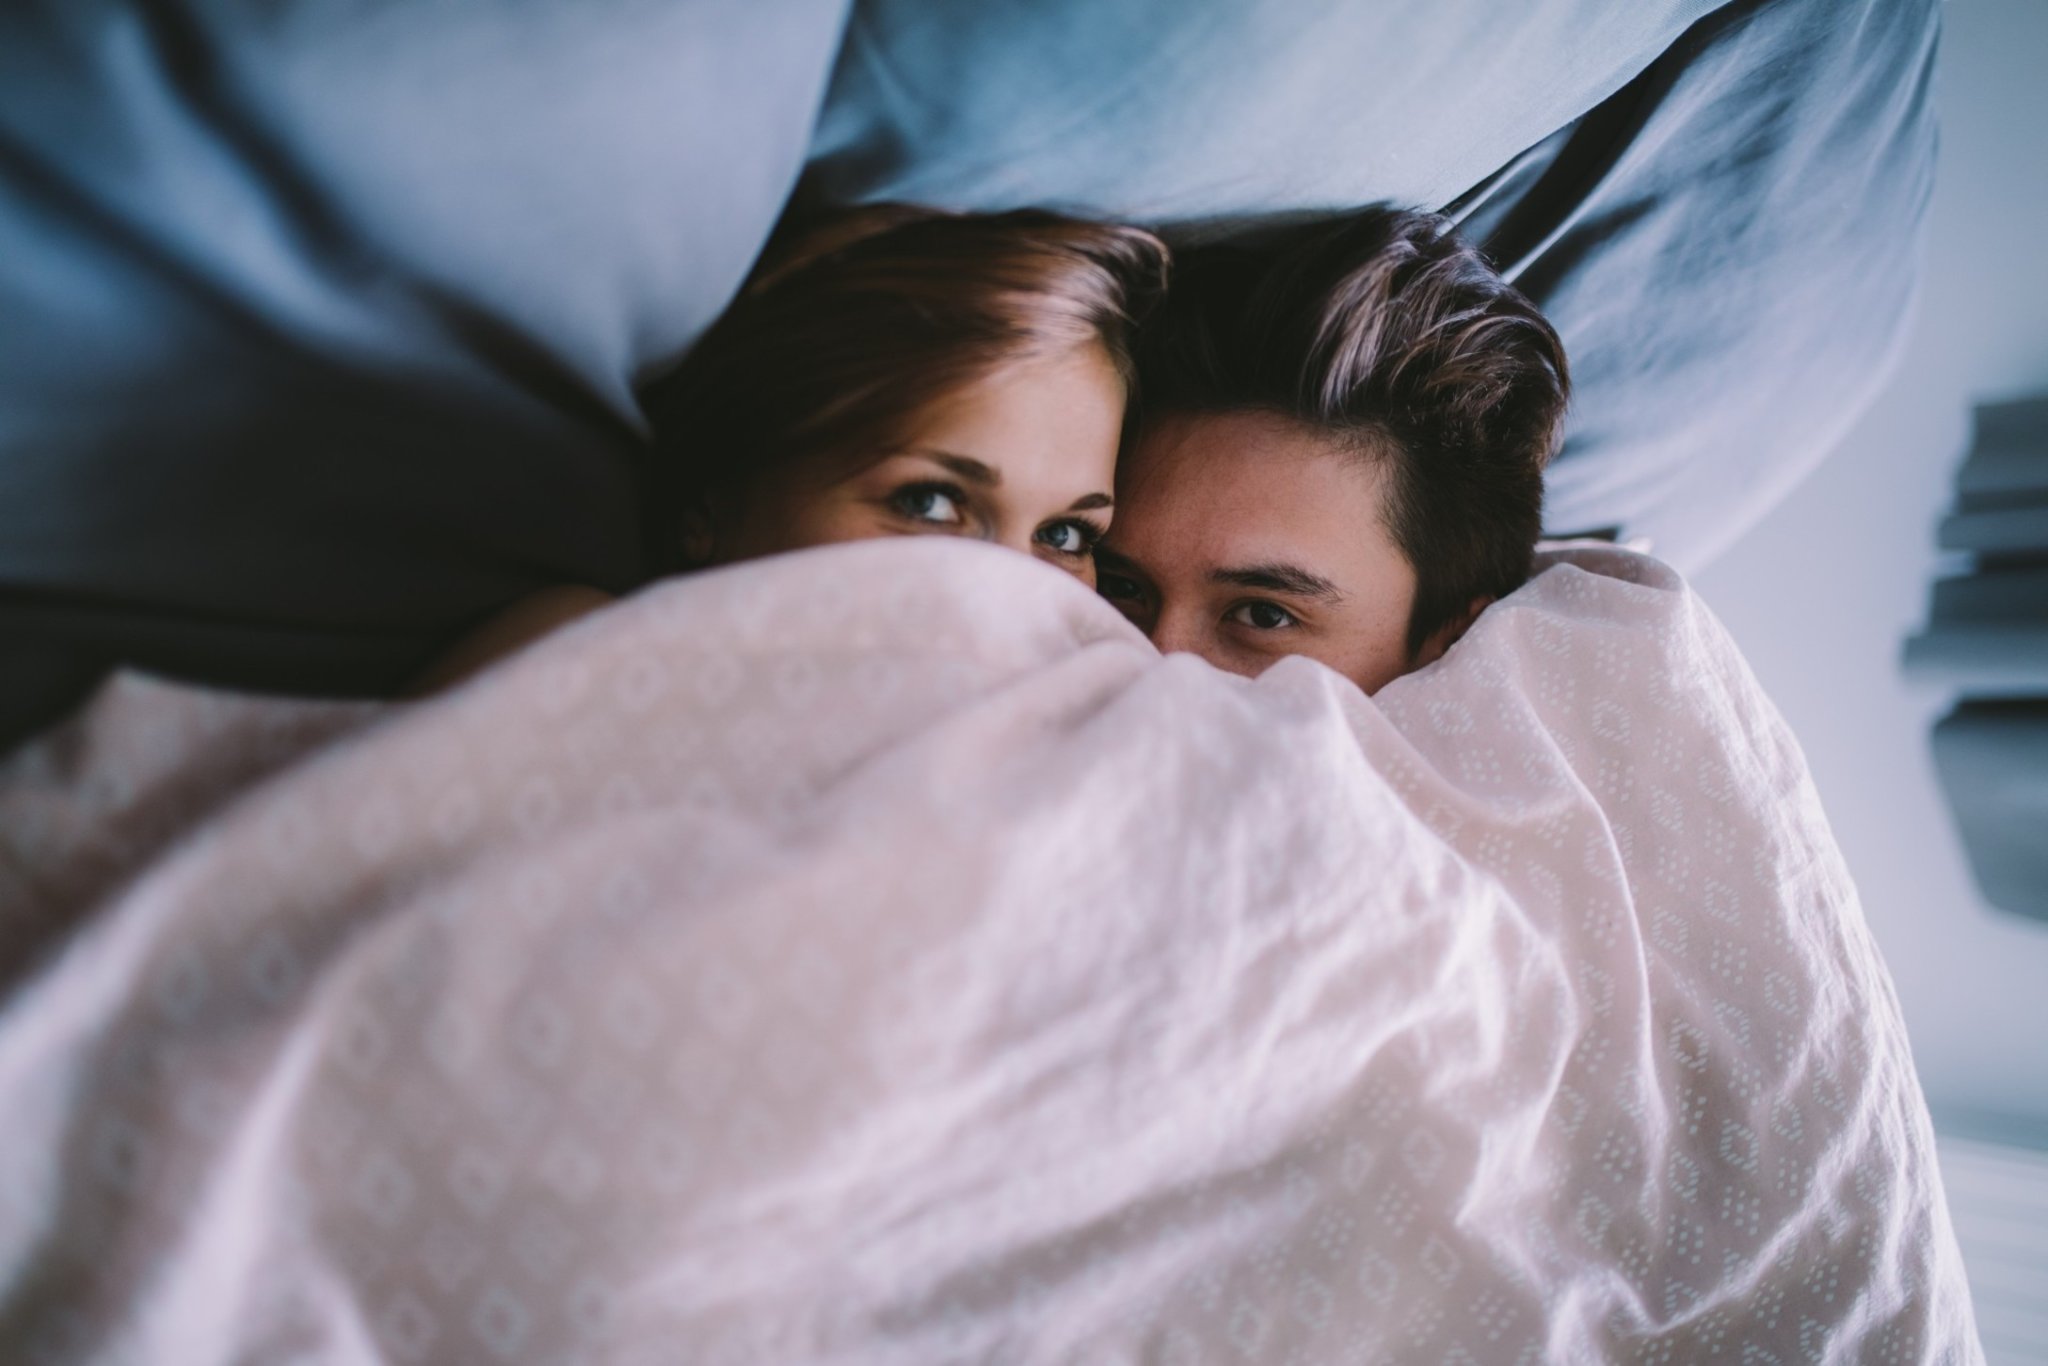 20 Moms Confess What They Wish Their Partners Would at Least Try in the Bedroom